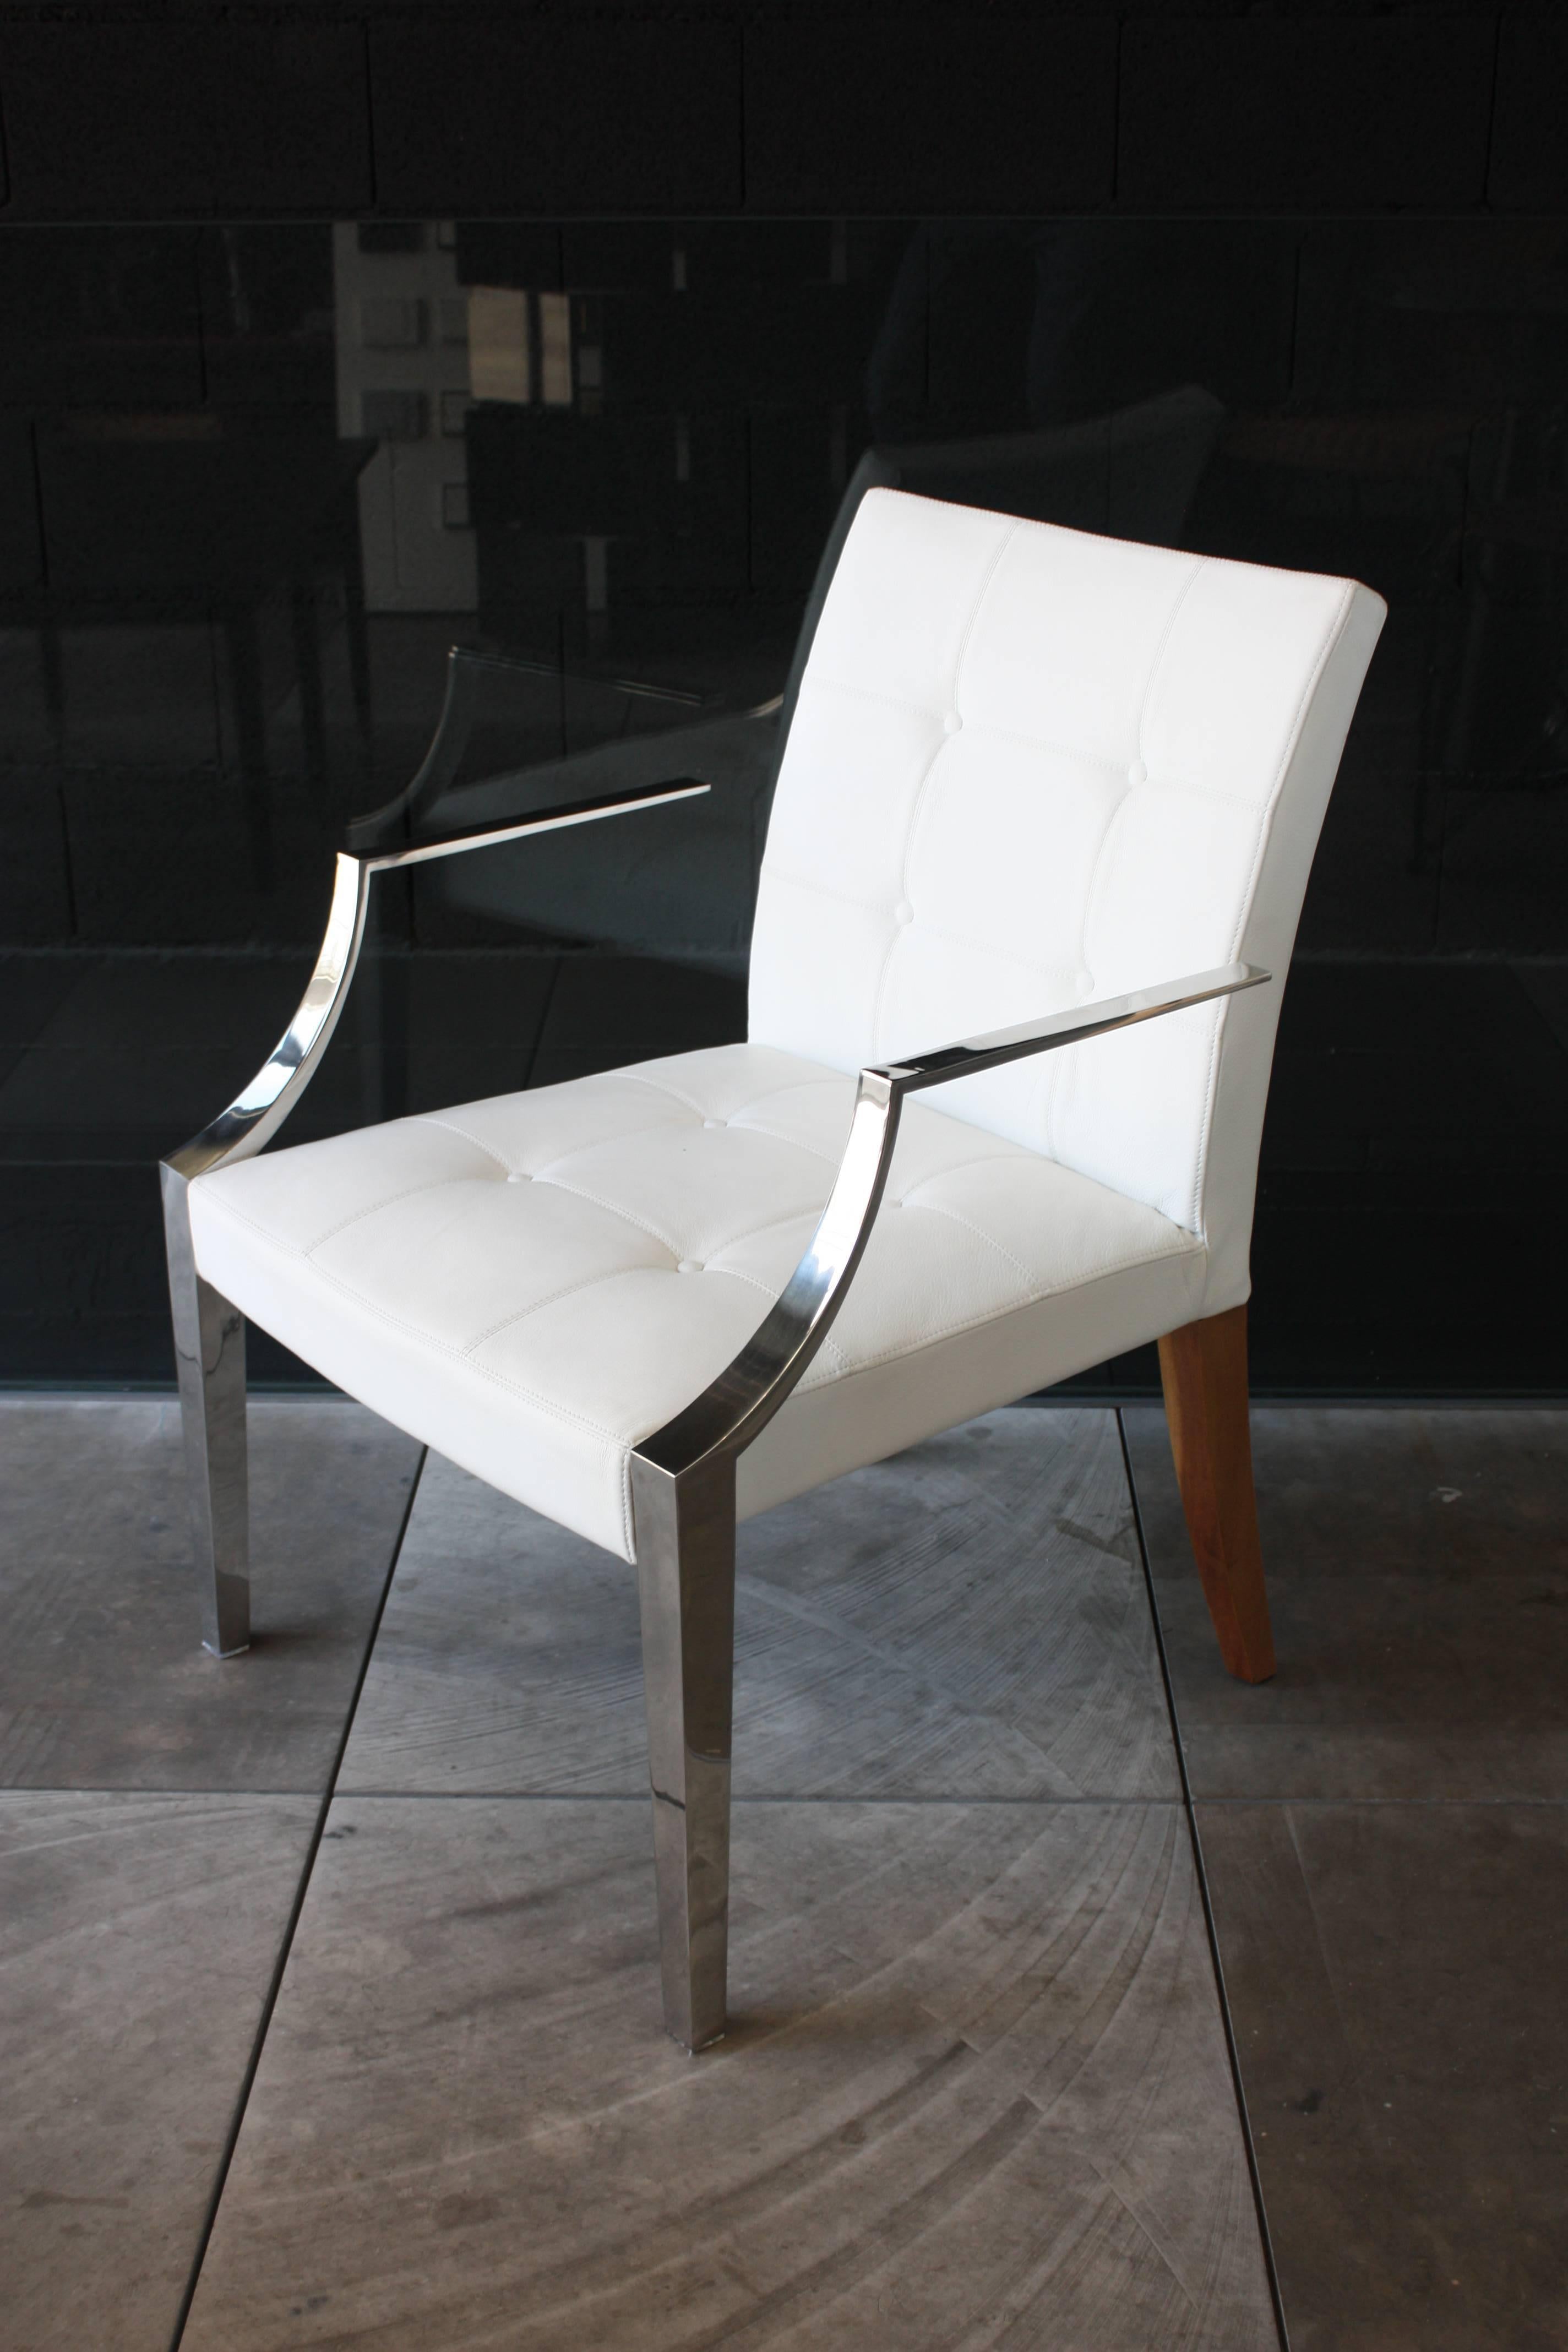 Armchair Monseigneur designed by Philippe Starck for Driade, Italy. Structure with front legs/armrests in stainless steel casting and back legs in mahogany wood, seat and back in polyurethane foams with fixed cover in quilted white leather.